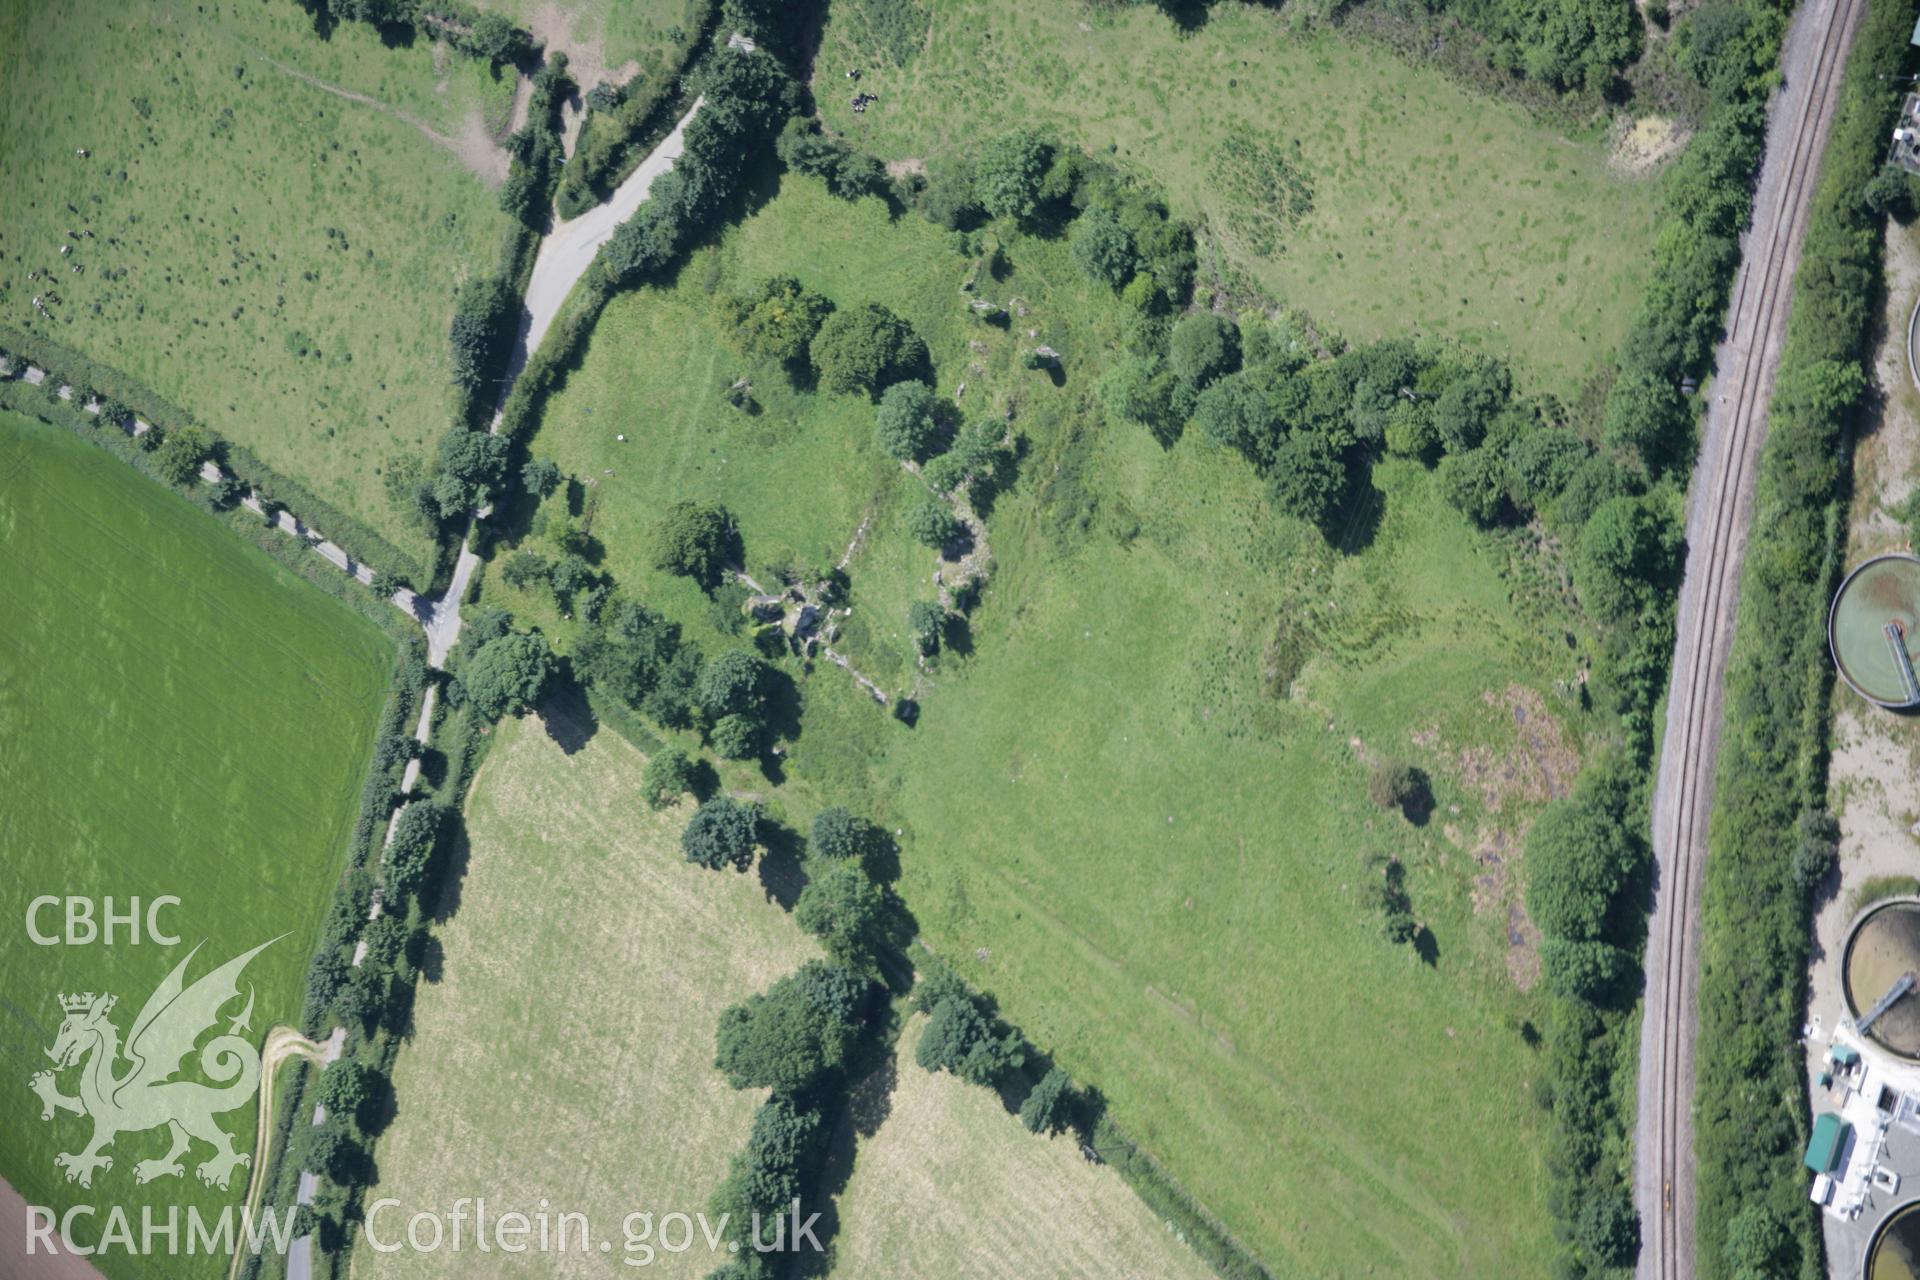 RCAHMW colour oblique aerial photograph of Haroldston House Garden Earthworks, Haverfordwest, with the Royal Commission's survey in progress, from the north. Taken on 22 June 2005 by Toby Driver